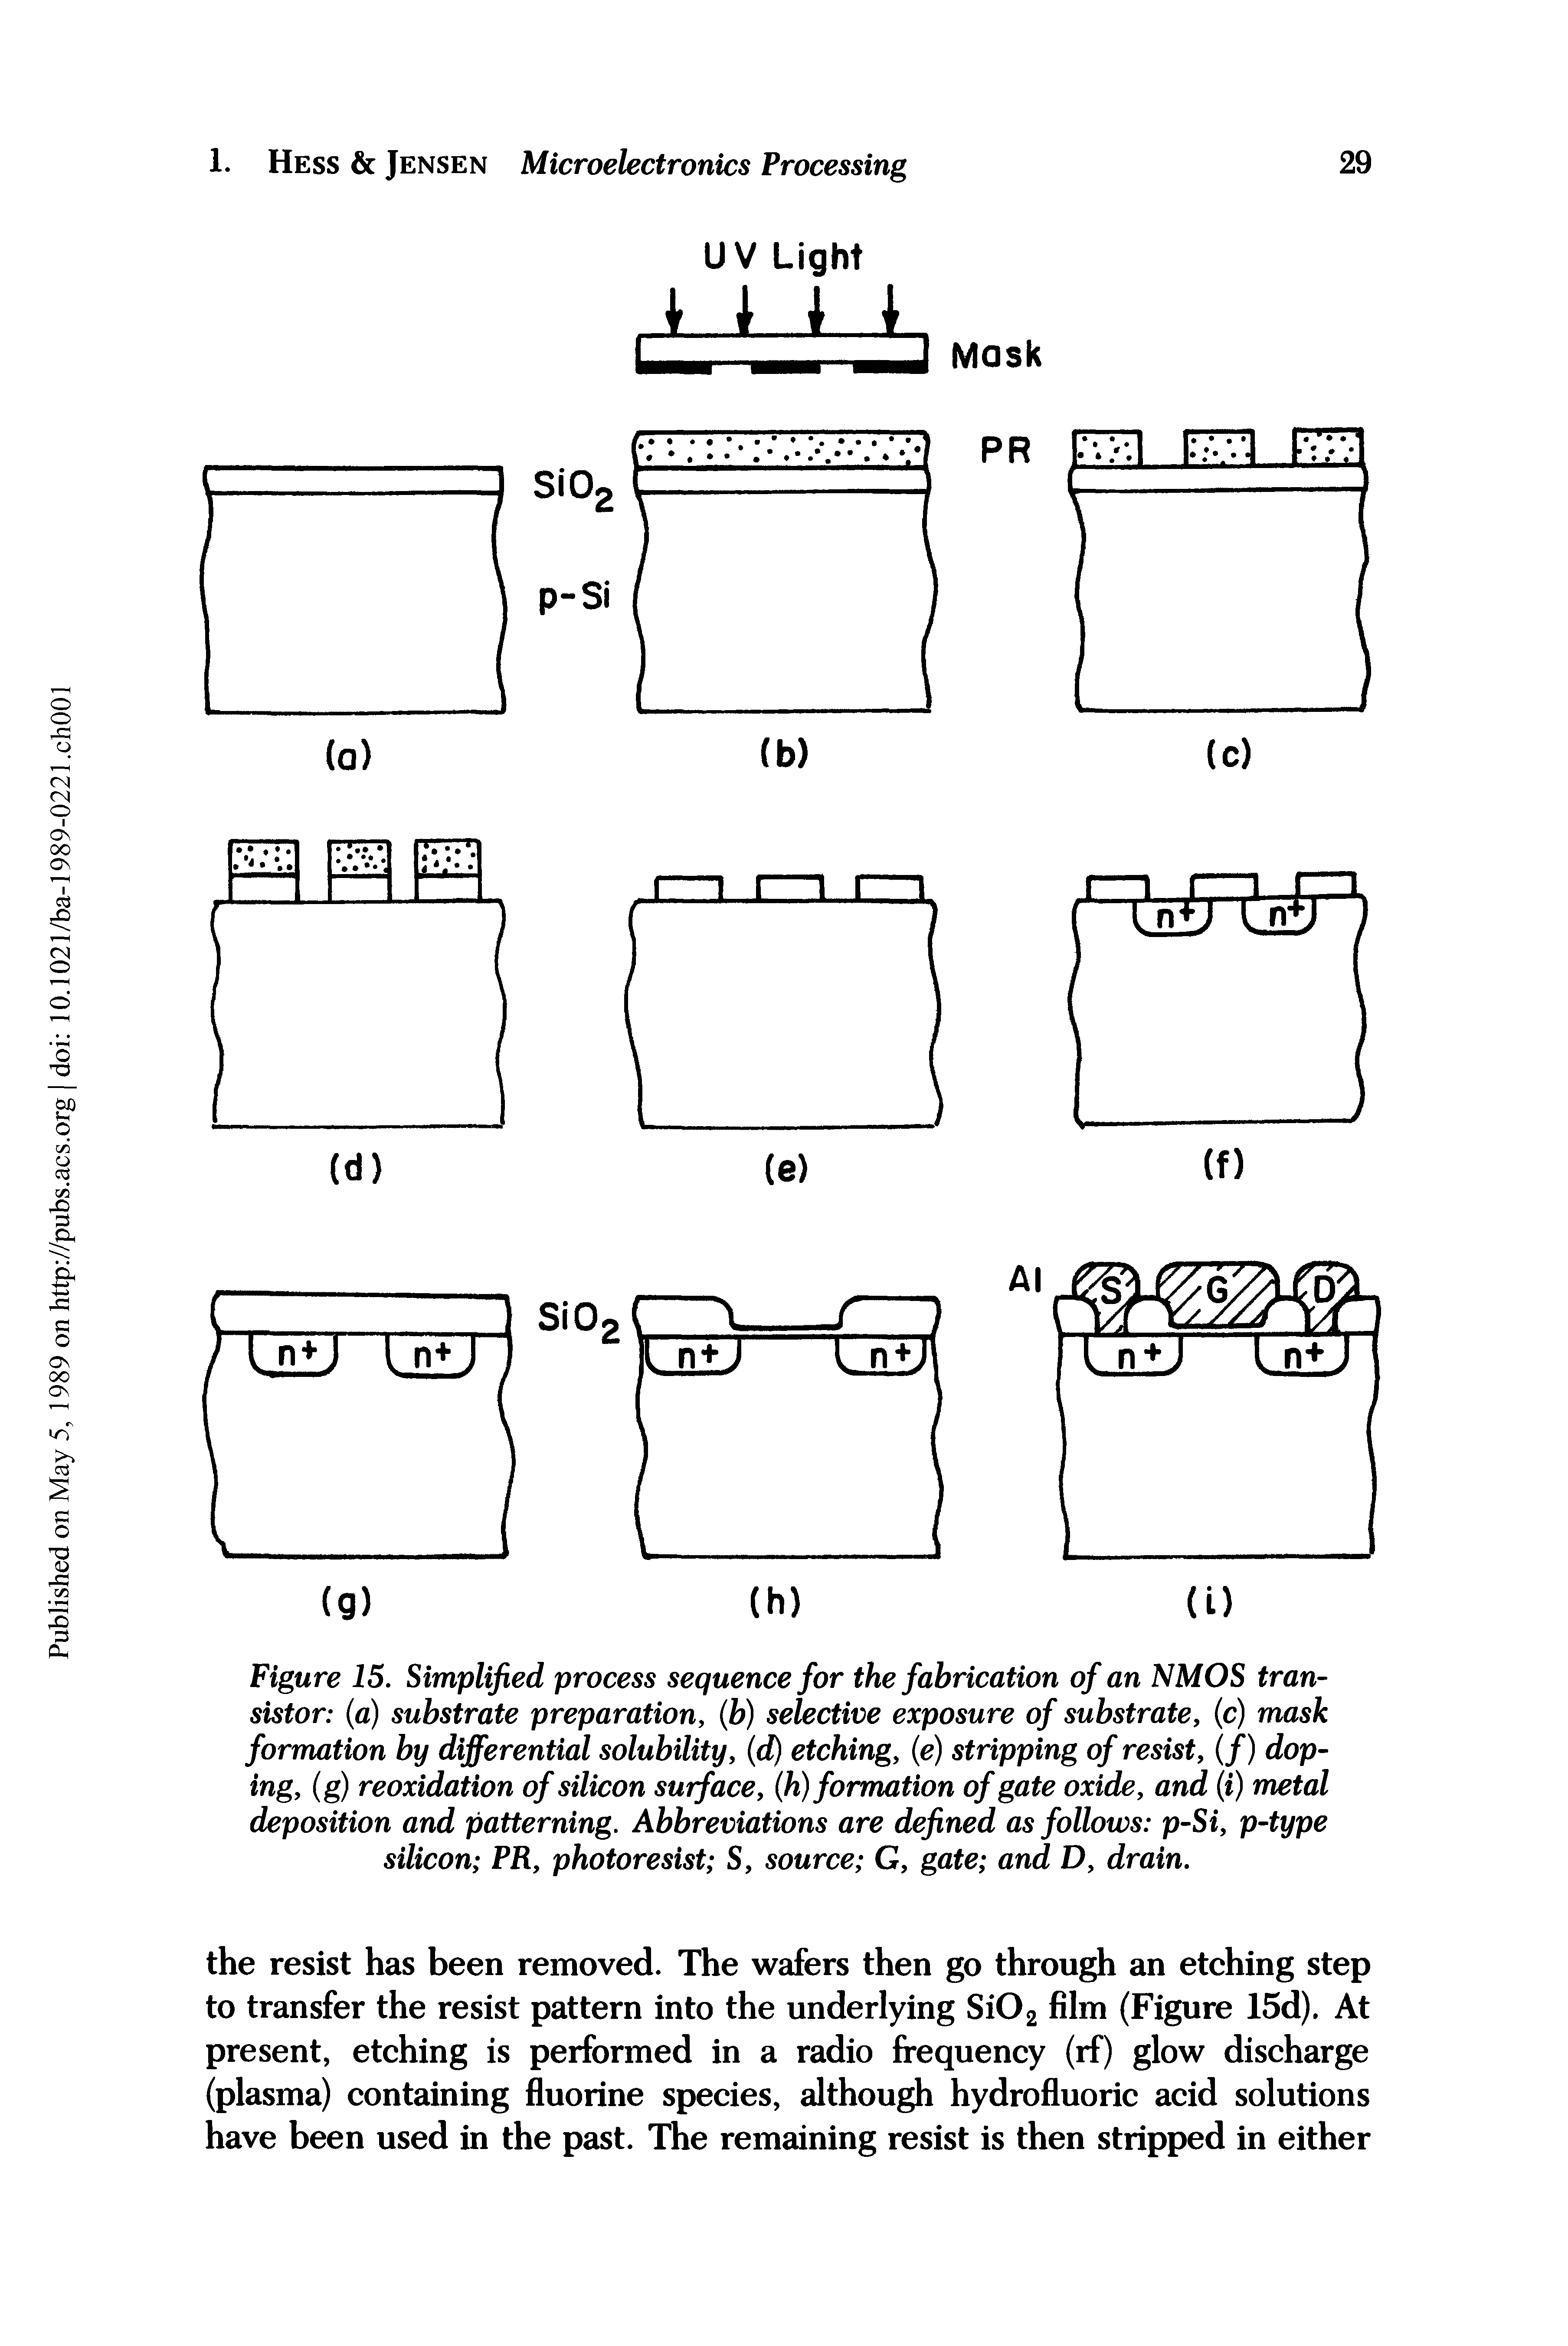 Figure 15. Simplified process sequence for the fabrication of an NMOS transistor (a) substrate preparation, (b) selective exposure of substrate, (c) mask formation by differential solubility, (d) etching, (e) stripping of resist, (/) doping, (g) reoxidation of silicon surface, (h) formation of gate oxide, and (i) metal deposition and patterning. Abbreviations are defined as follows p-Si, p-type silicon PR, photoresist S, source G, gate and D, drain.